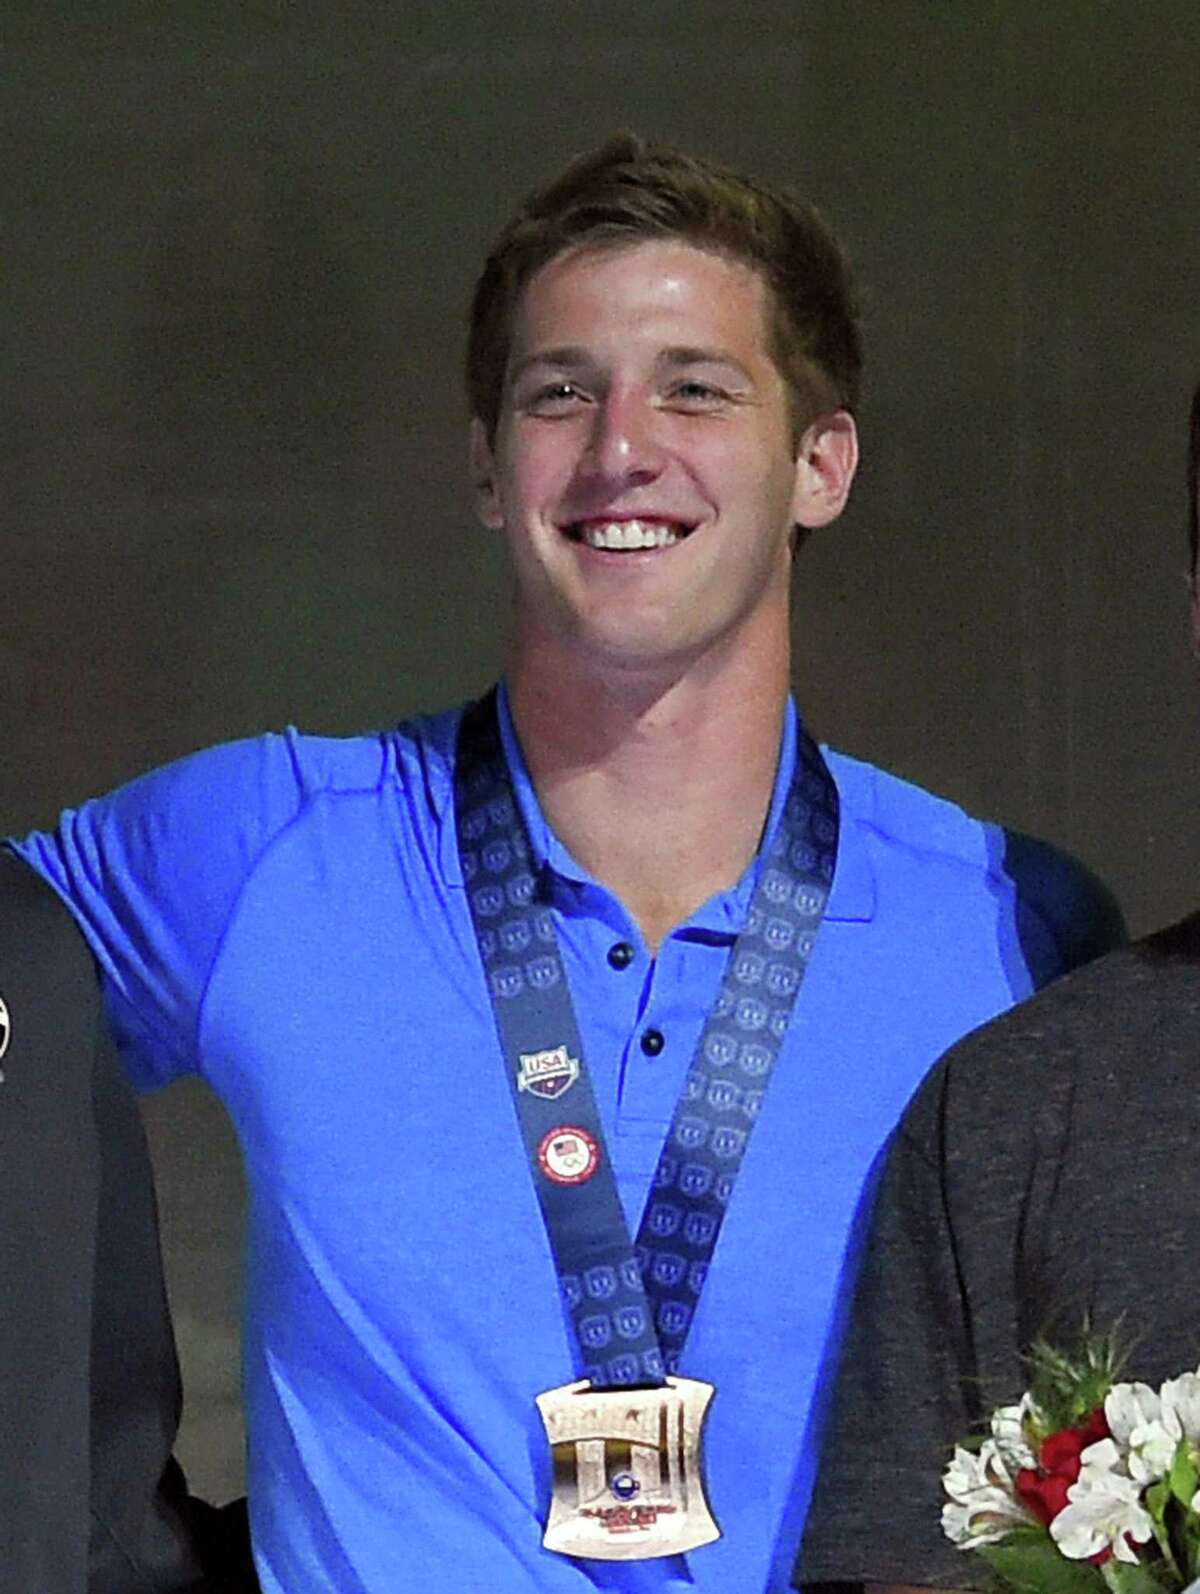 Former Churchill and UT standout Jimmy Feigen smiles during the men’s 400-meter relay team medal ceremony at the U.S. Olympic Swimming Trials, in Omaha, Neb., on July 3, 2016.